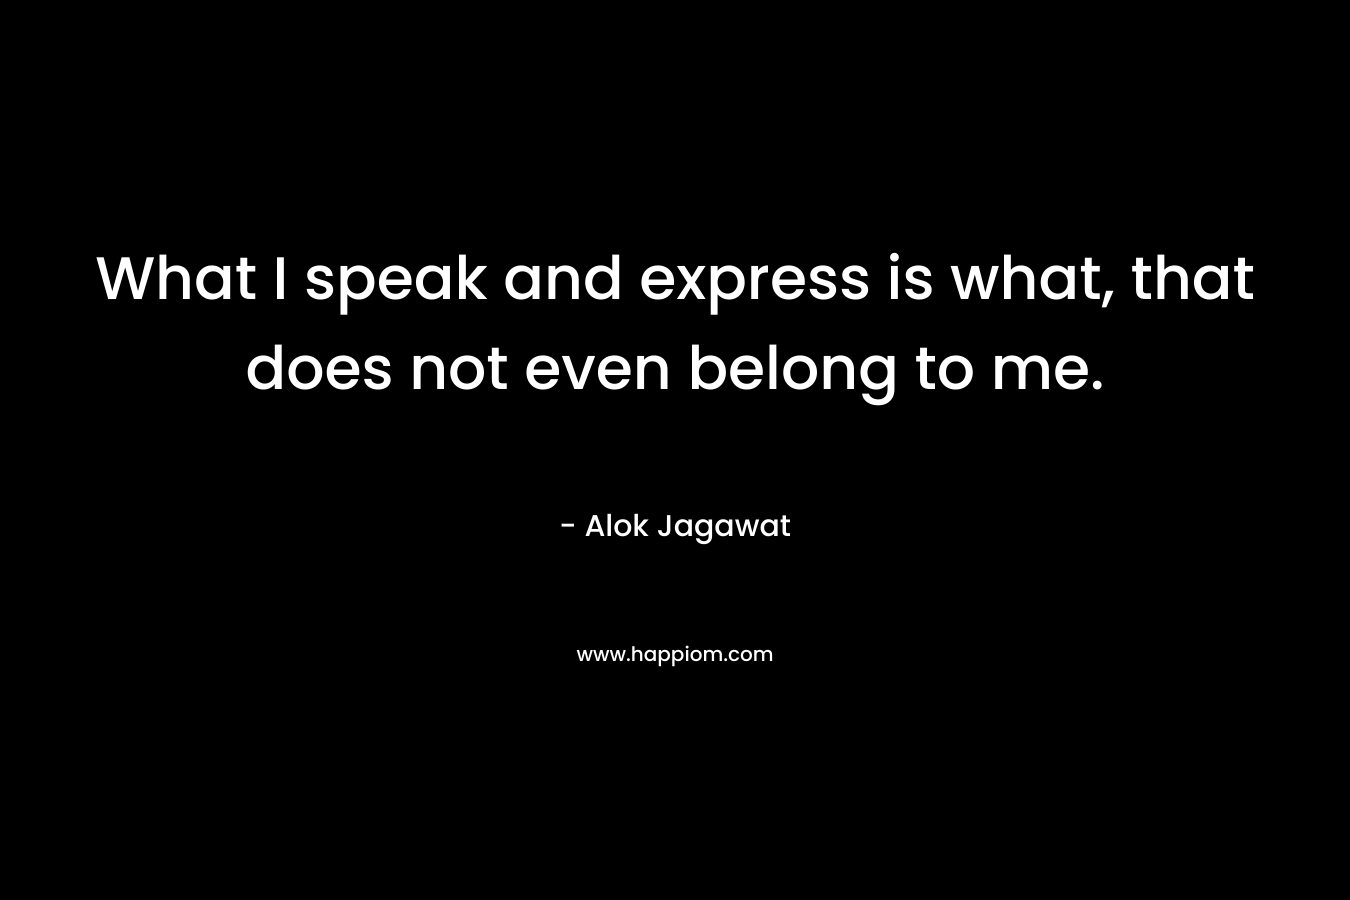 What I speak and express is what, that does not even belong to me.